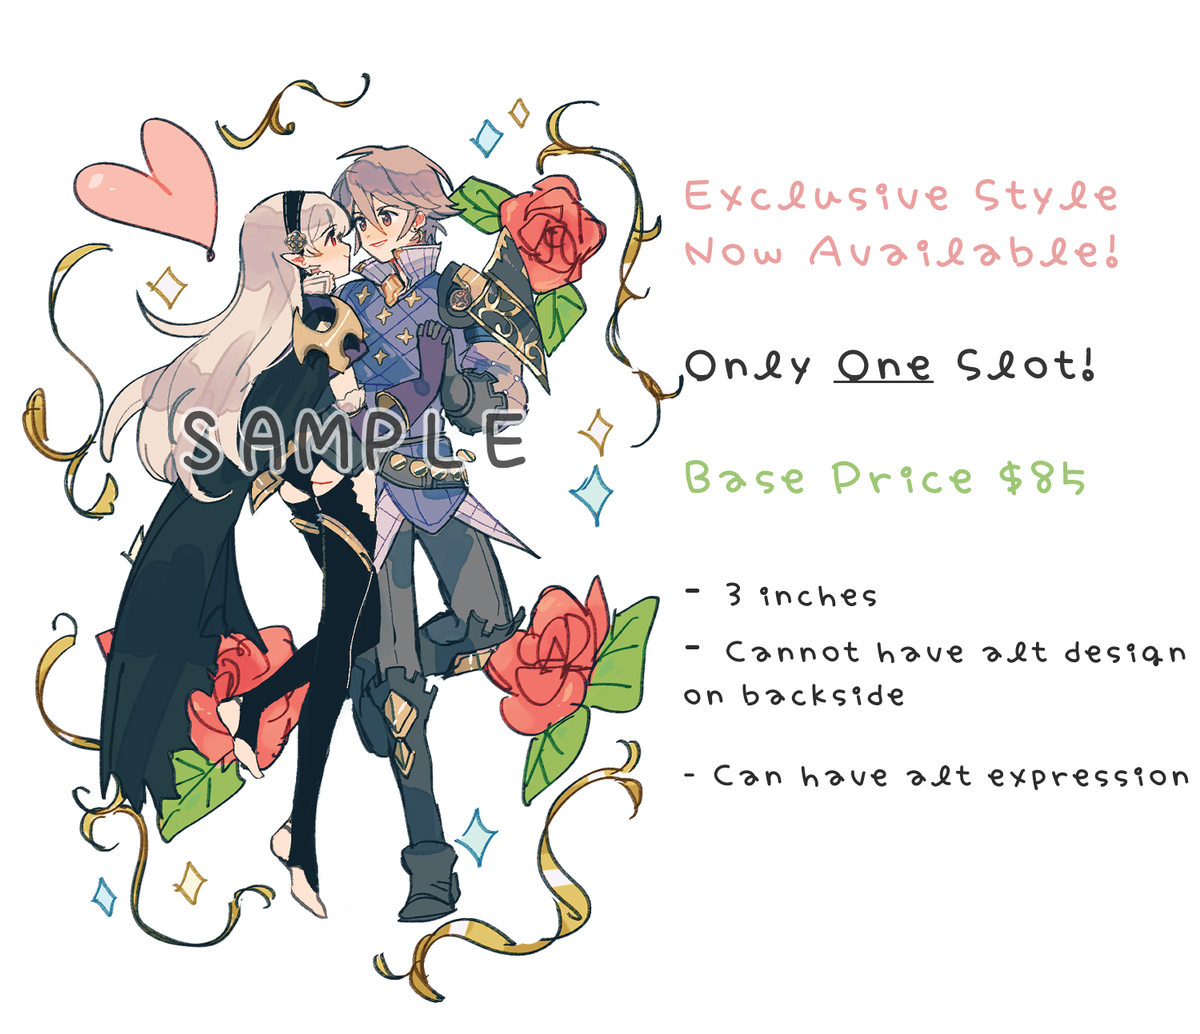 As usual custom charm comms are available again~
And for the first time with an exclusive full body couple/pairing style! Slots are very limited! tysm~

If interested, apply here:
?Charm Comm: https://t.co/O61xMGt5nV
?Prev Comm > Charm Conversion: https://t.co/Ji9OzpbL8W 